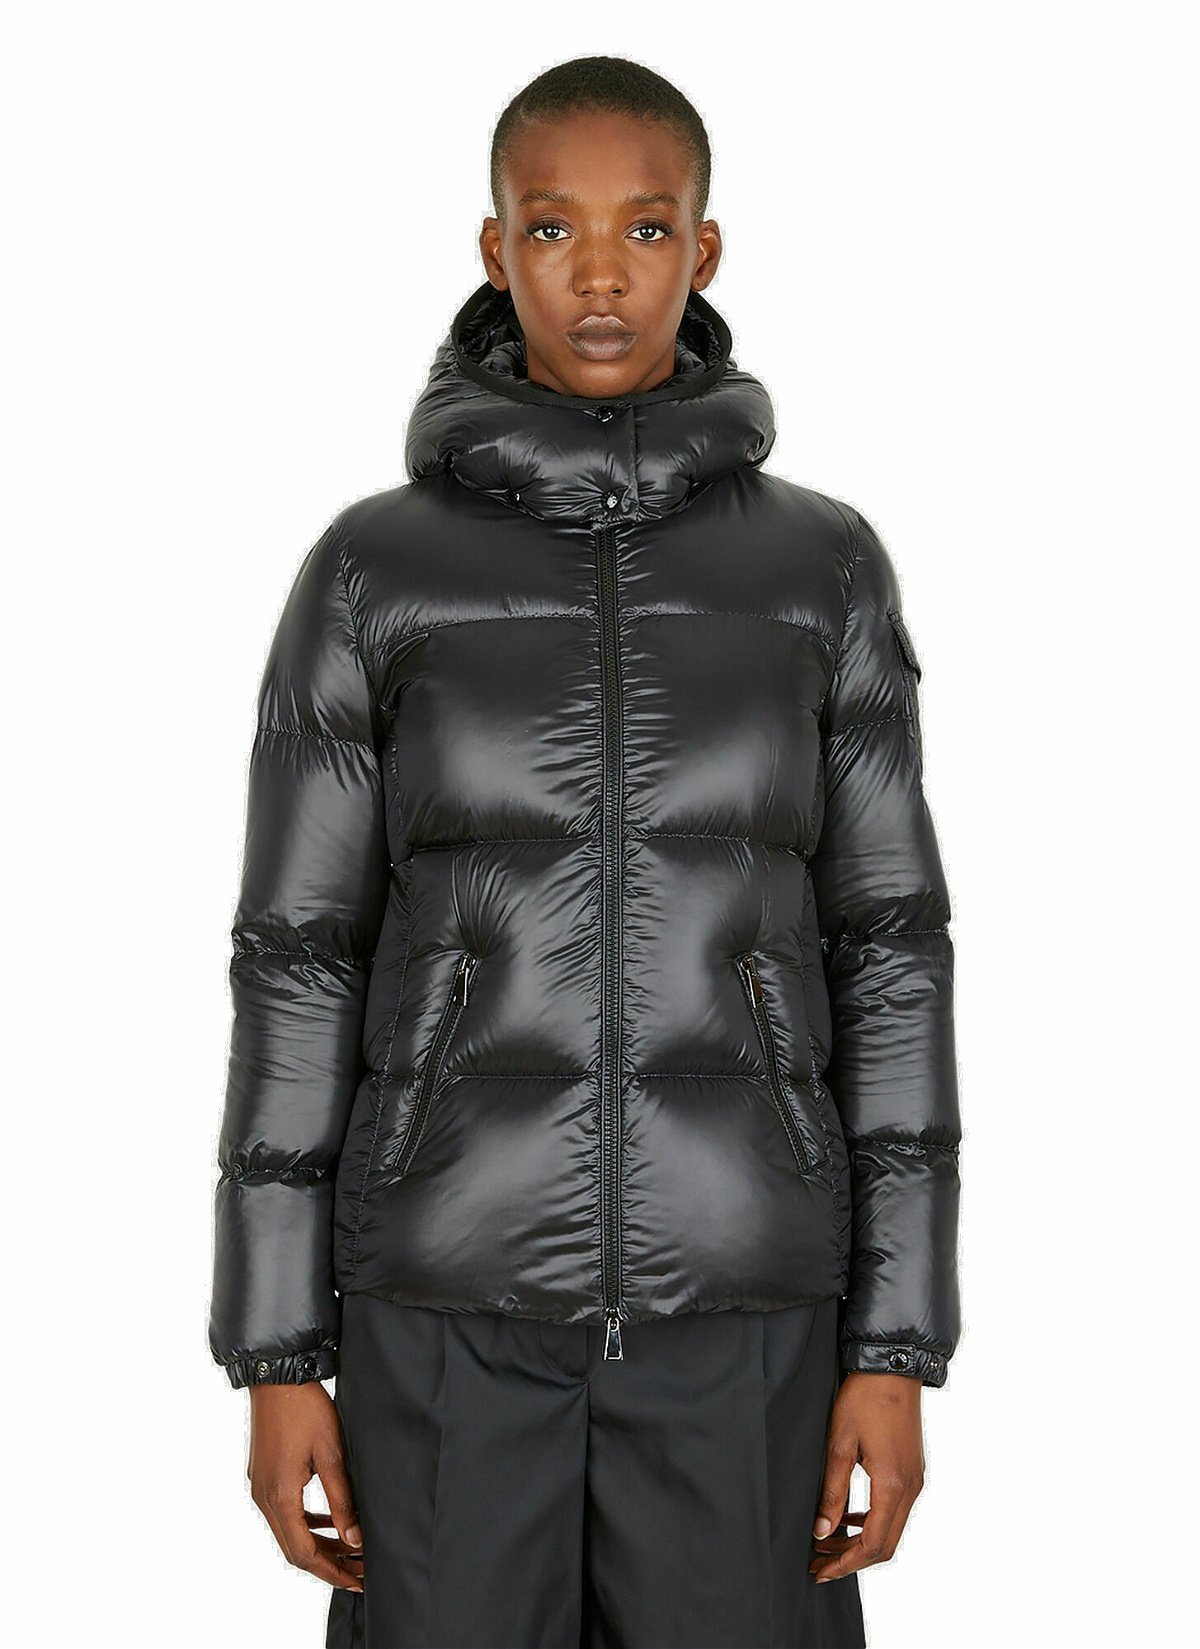 Fourmine Hooded Puffer Jacket in Black Moncler